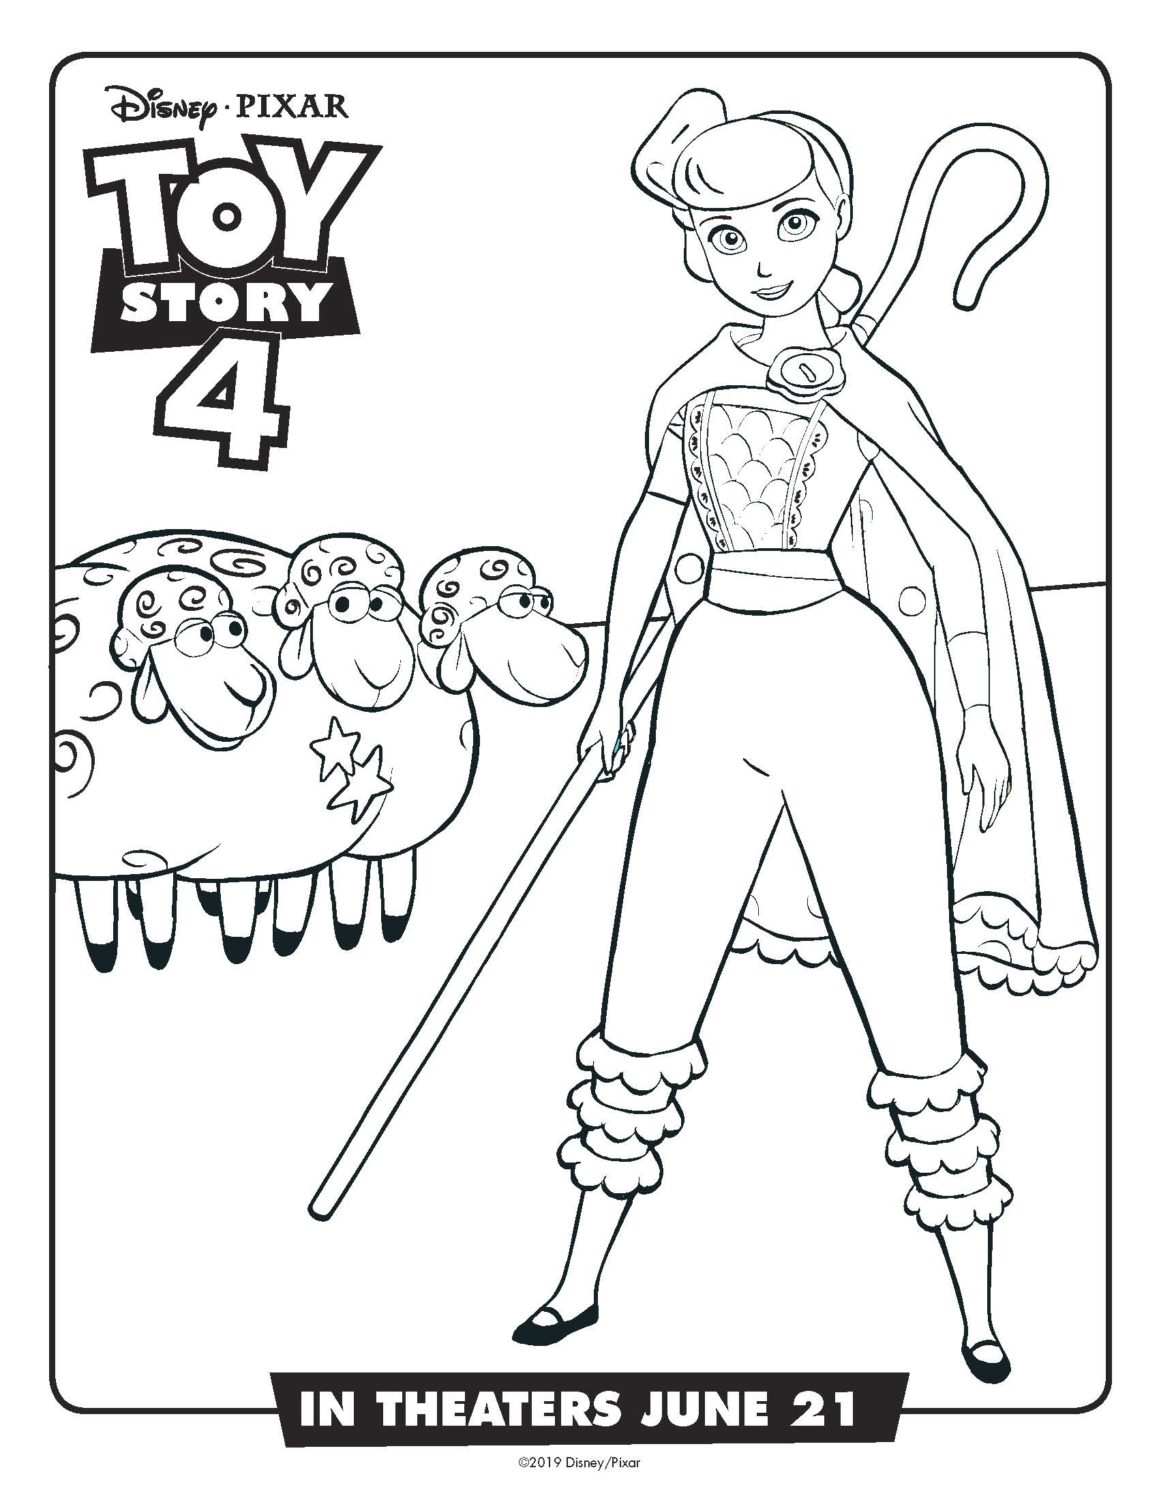 Toy Story 4 Bo Peep Coloring Page and Activity Sheet